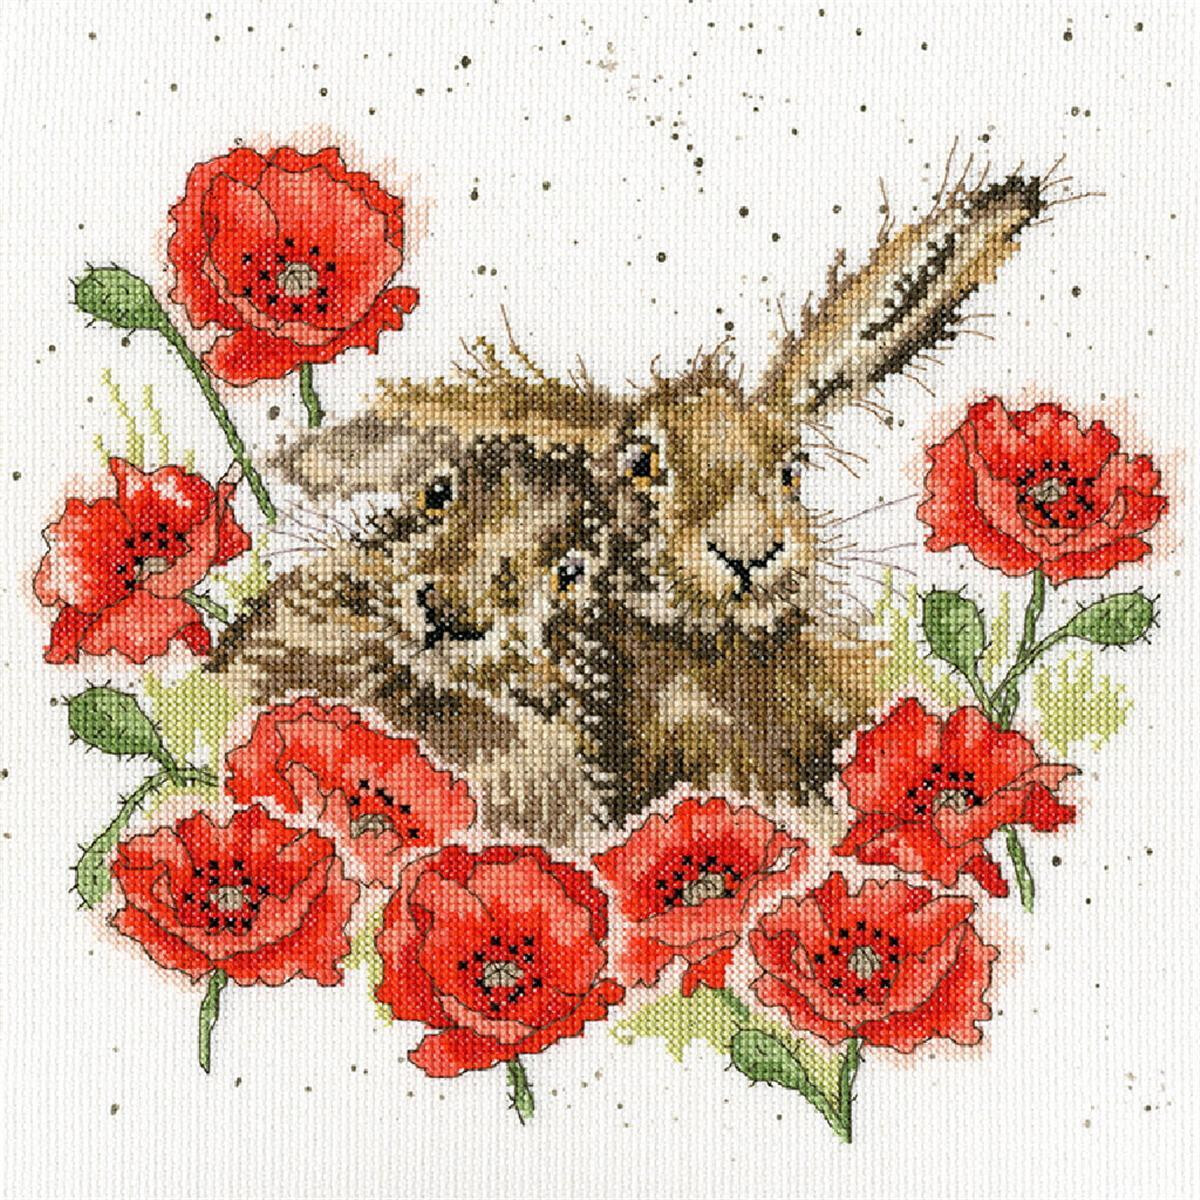 The embroidered image, created using a high quality Bothy...